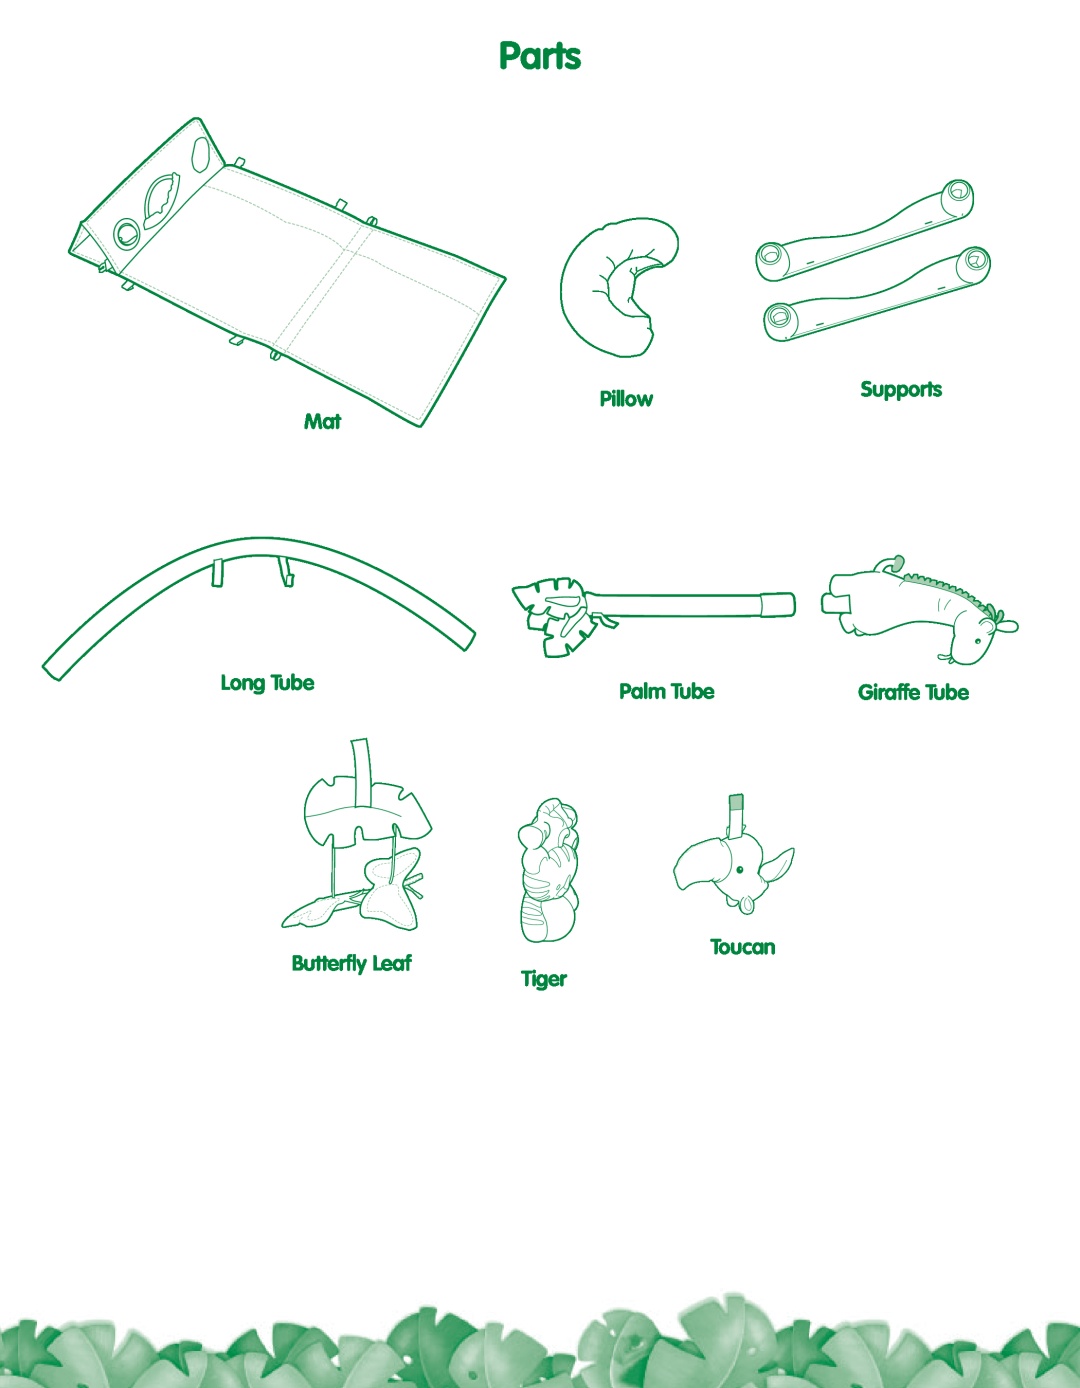 Fisher-Price L1664 instruction sheet Parts, PillowSupports Mat, Long Tube, Palm Tube, Butterfly Leaf, Toucan, Tiger 